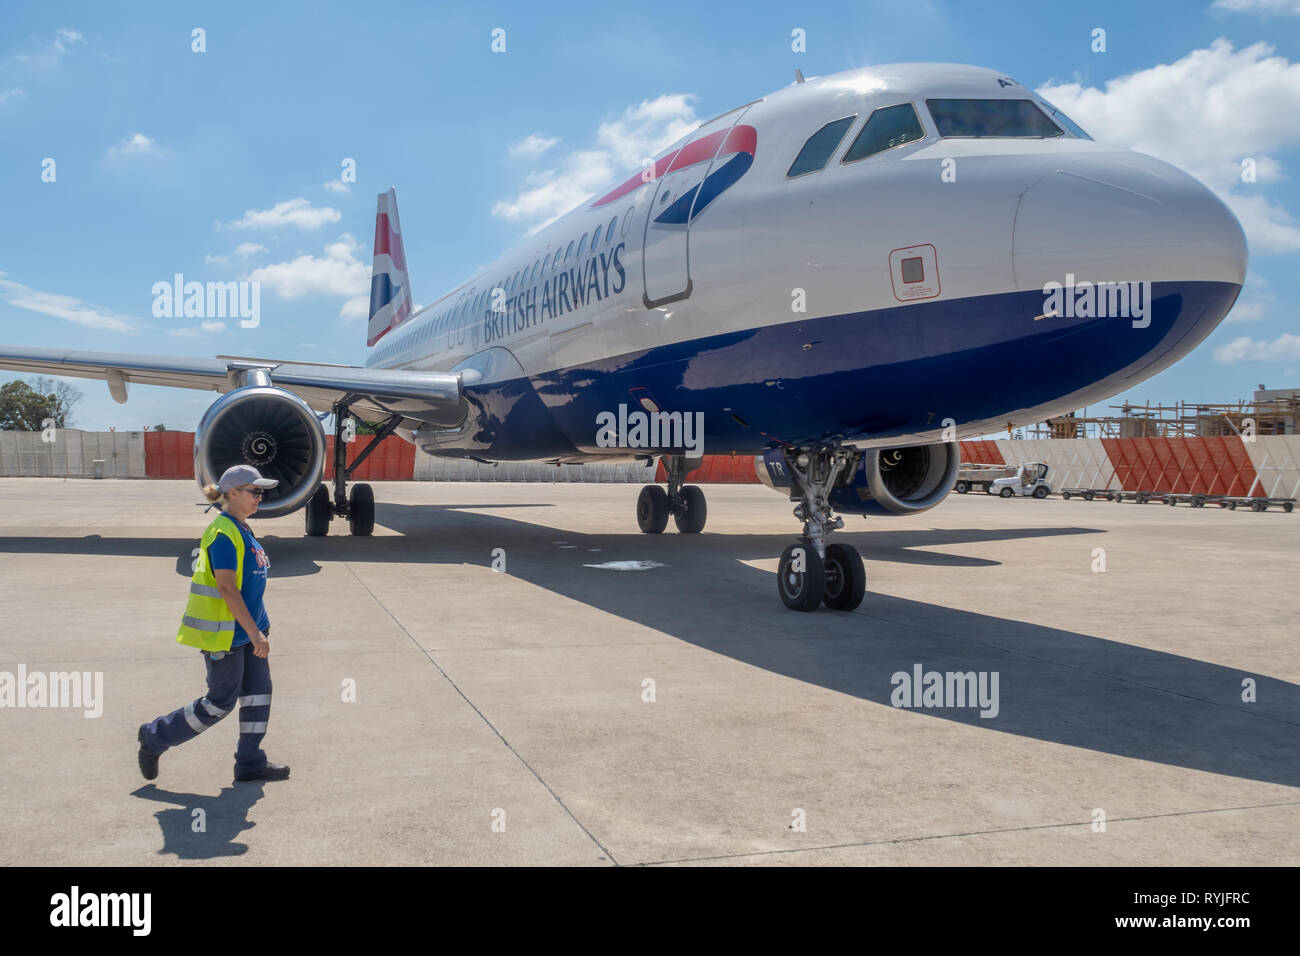 PREVEZA, GREECE - JUNE 10 2018: Ground staff member walking past a Brisitish Airways airplane on Preveza airport tarmac in Greece Stock Photo